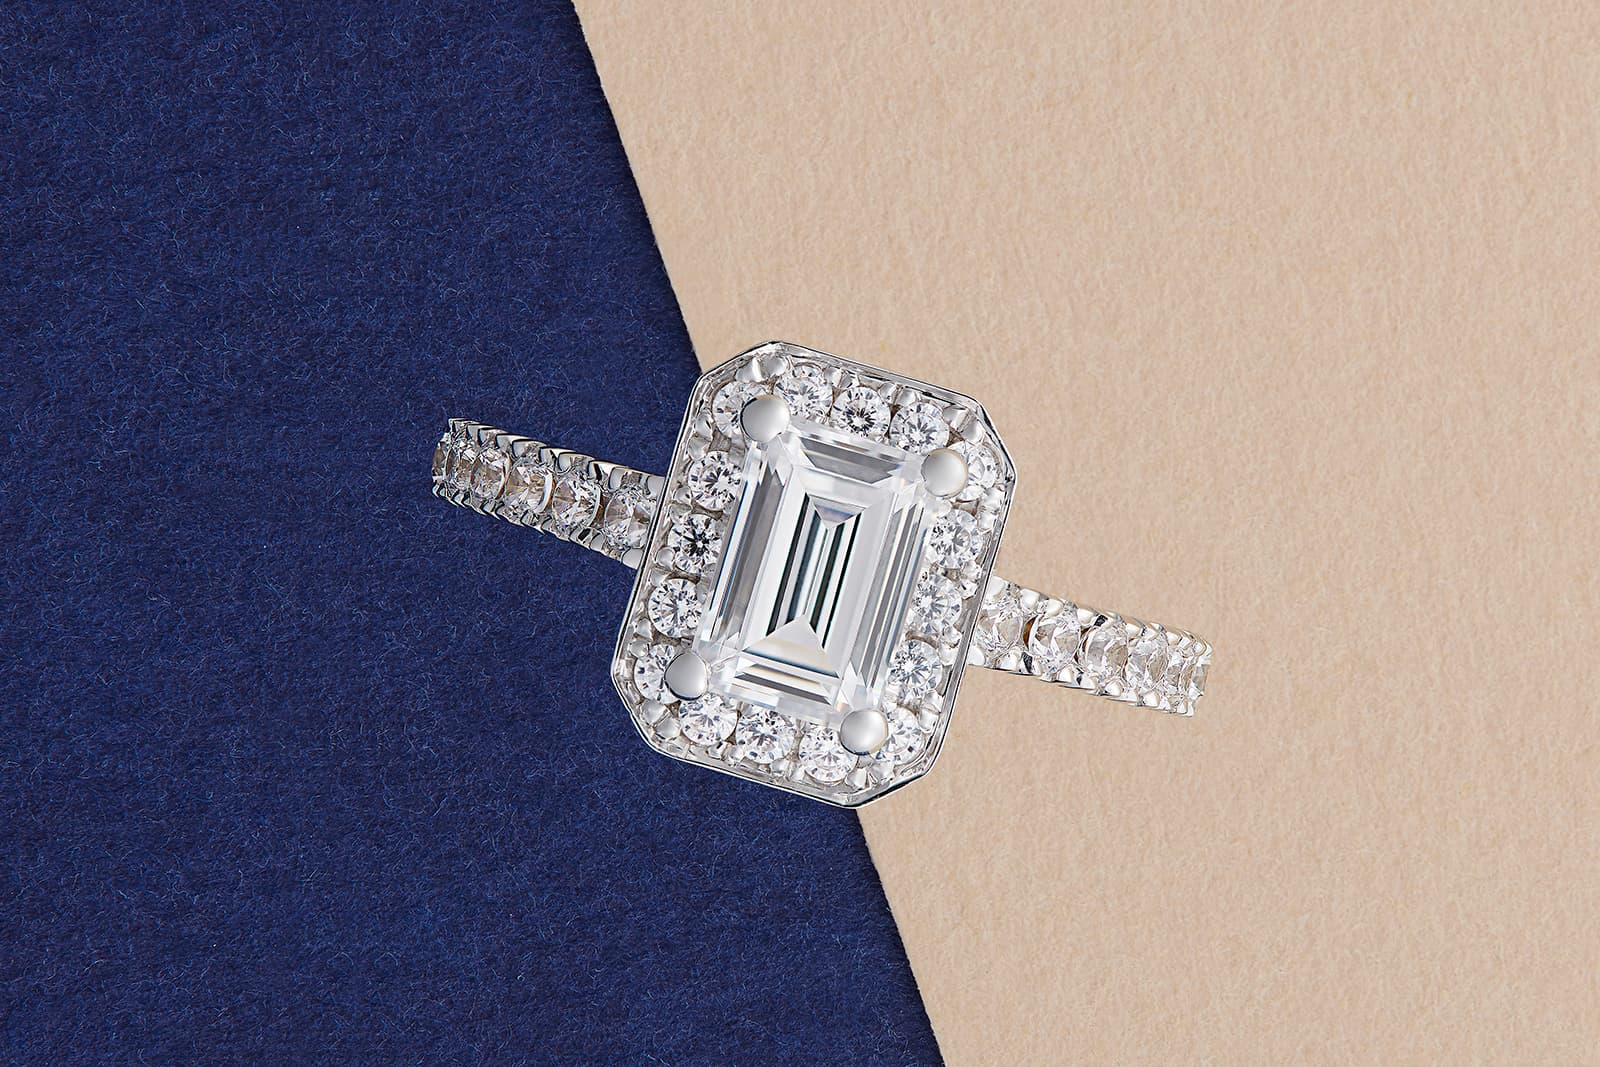 Taylor & Hart emerald-cut diamond engagement ring with a pavé diamond halo set in platinum